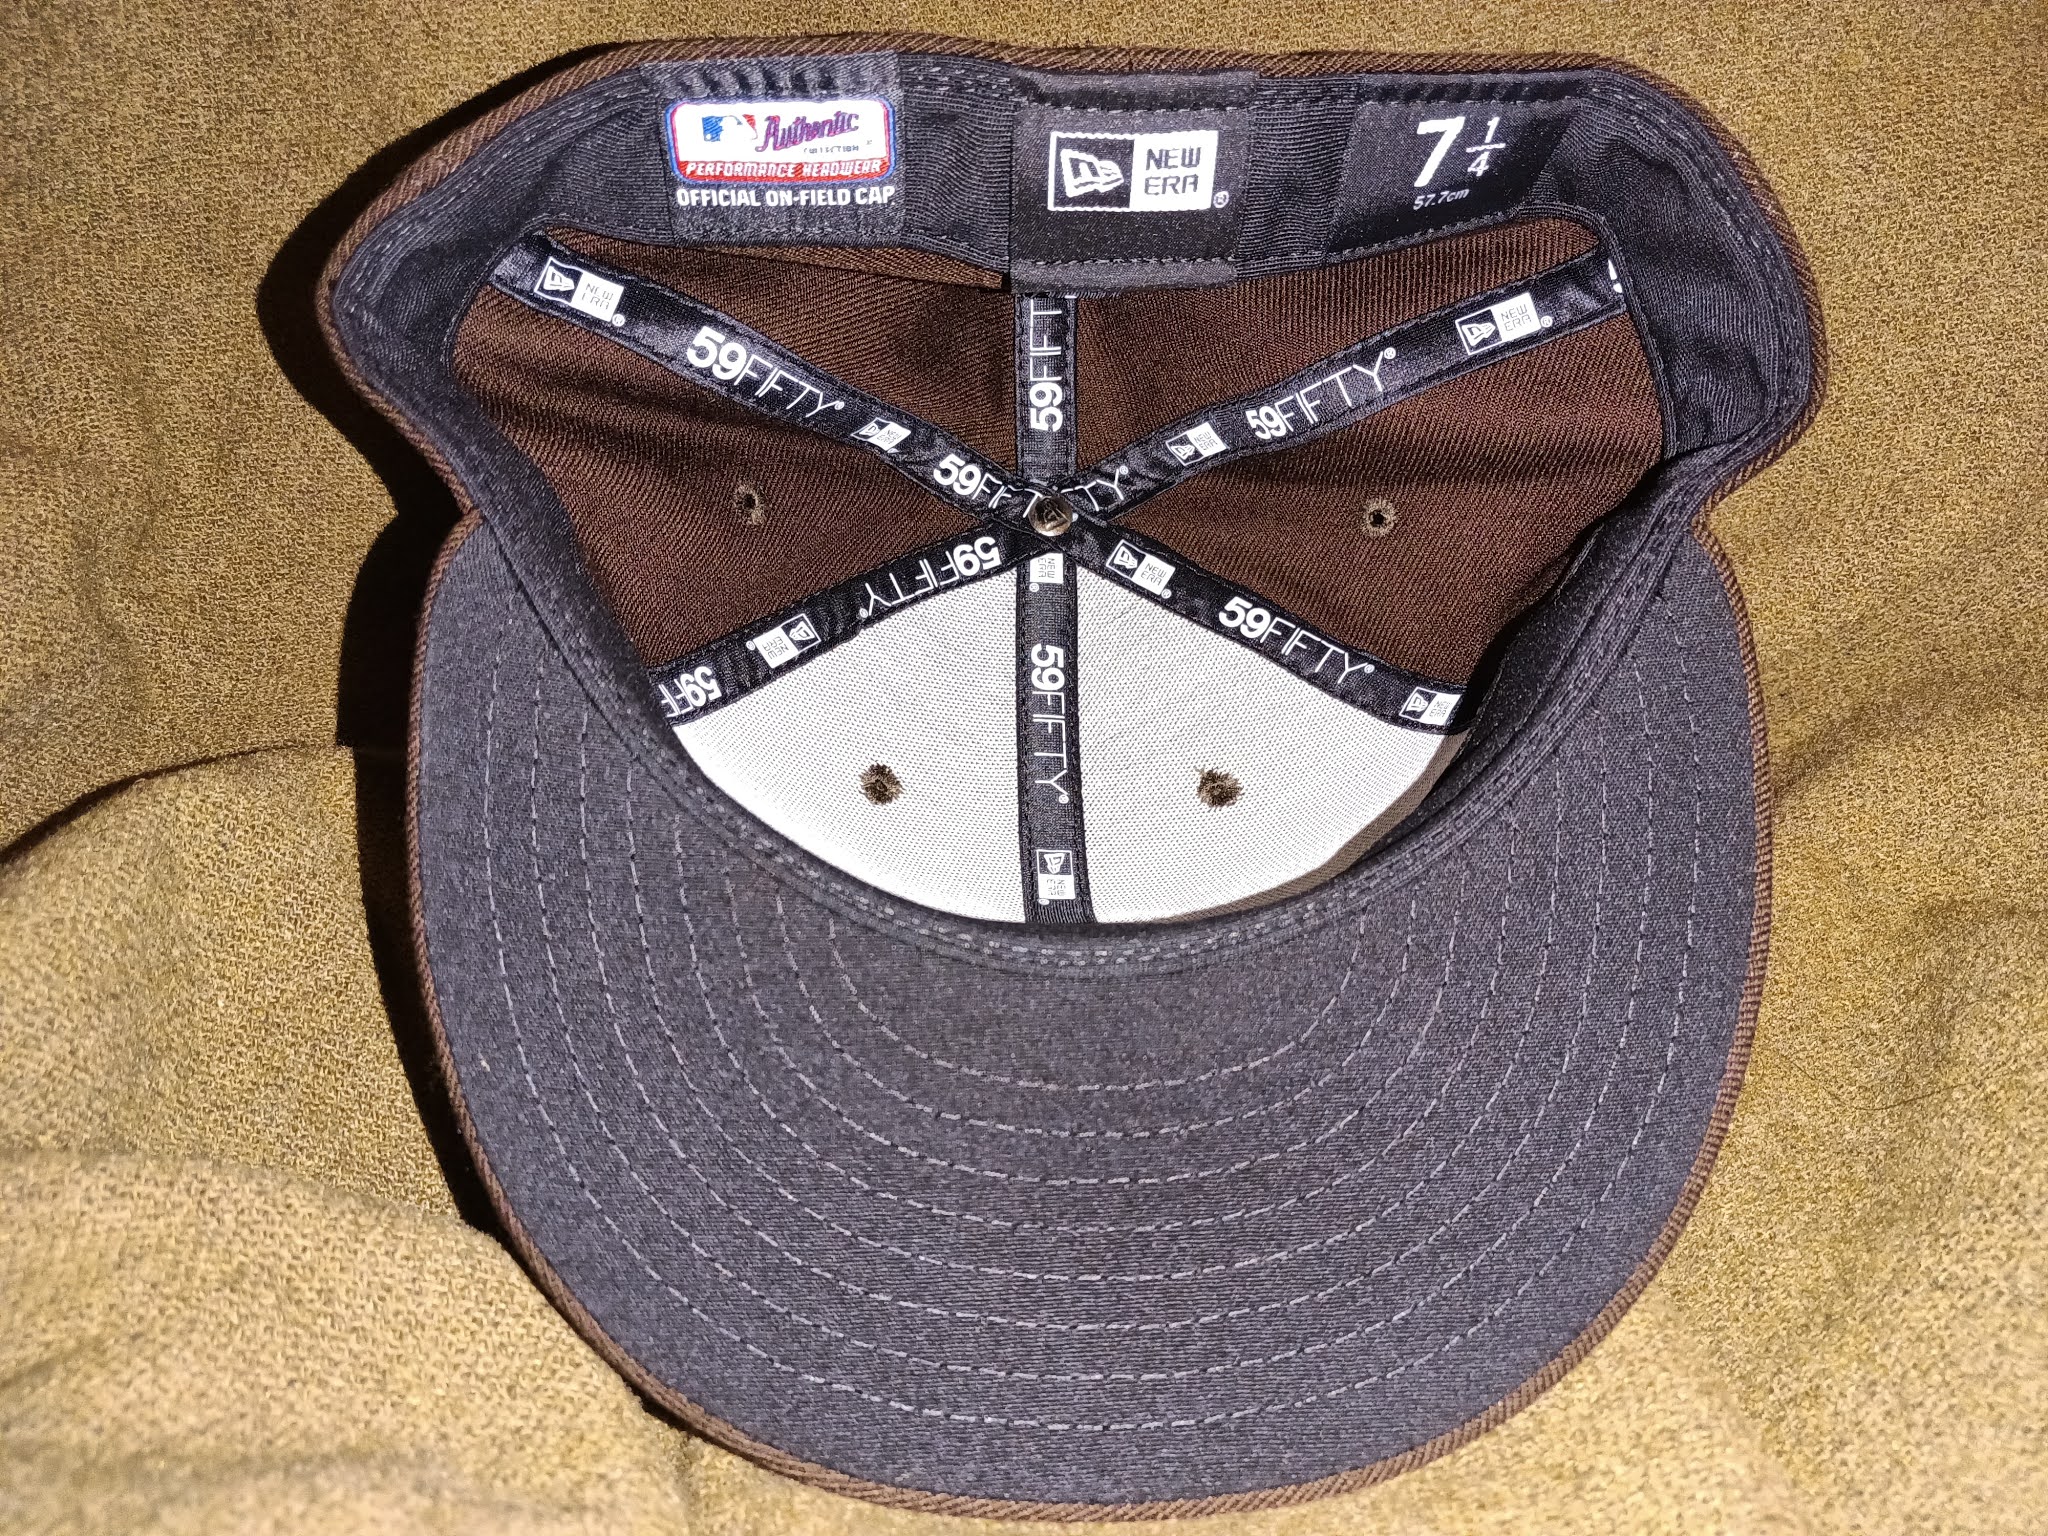 Biscuit zeil Verdorie Differences Between Derby, NY-made and Miami, FL-made New Era Caps - Old  vs. New "Made In USA"